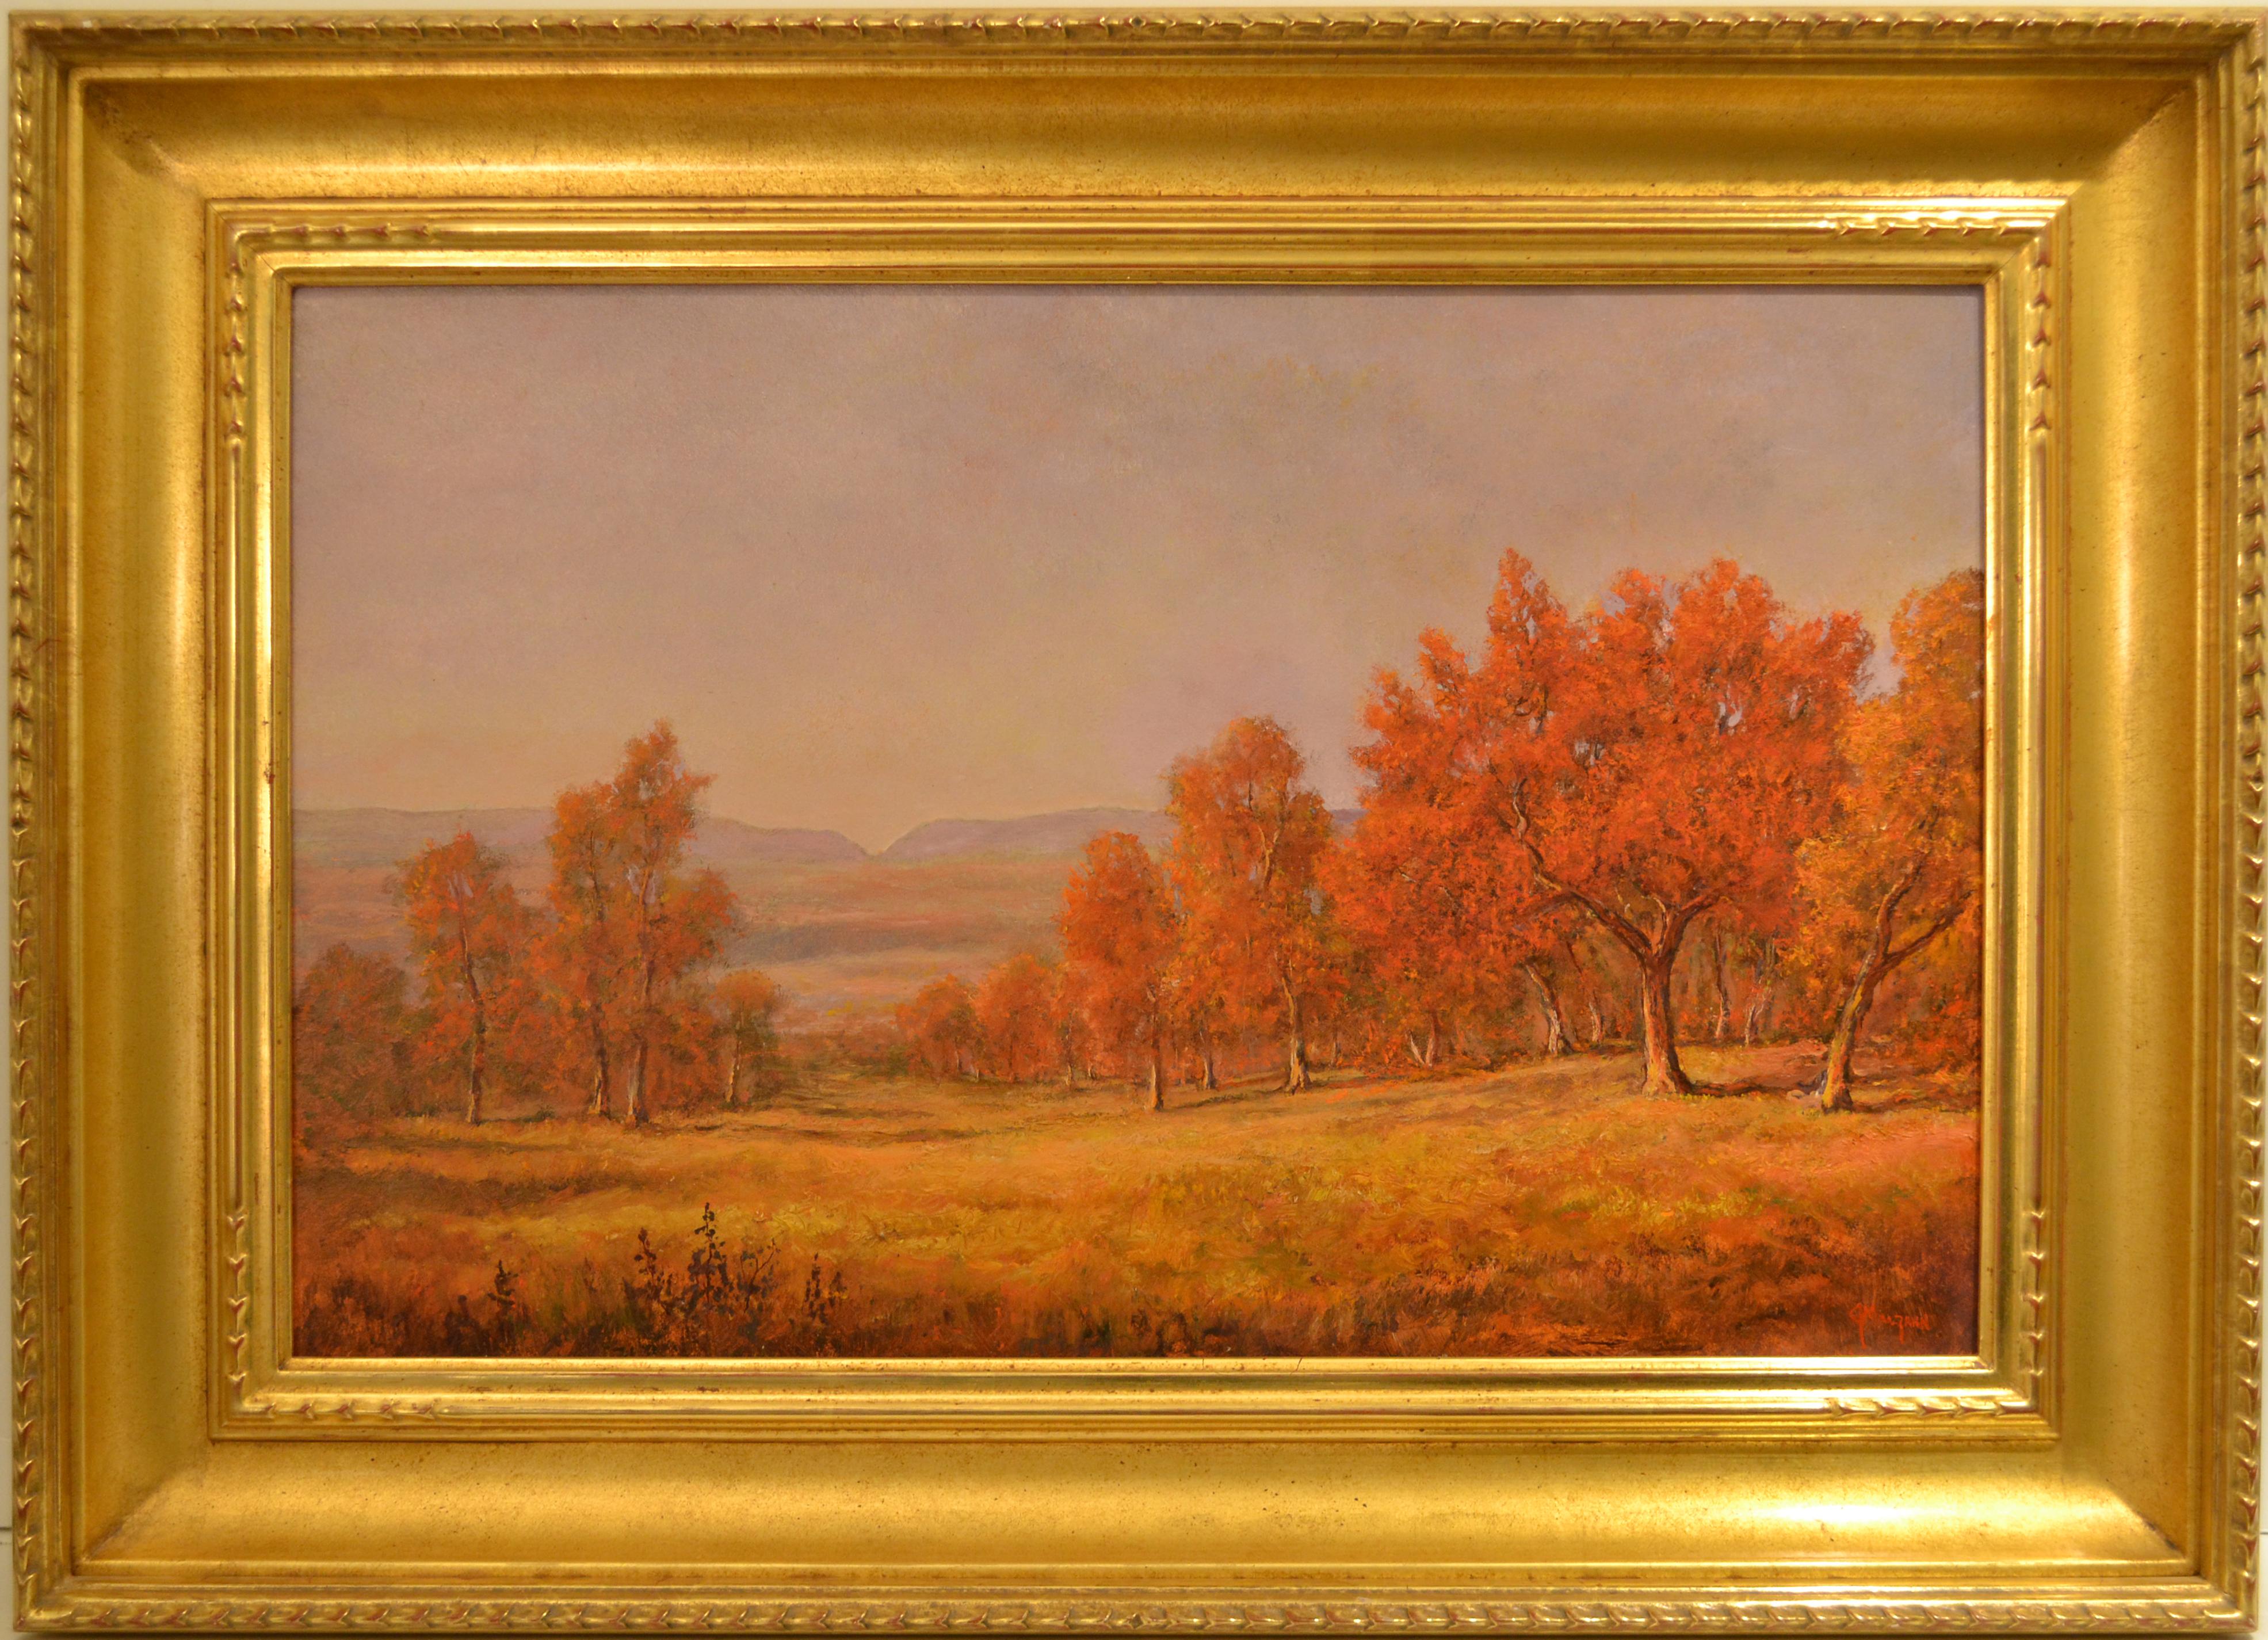 Framed size is 26 1/2 x 37 inches

Jerry Malzahn, a talented landscape artist, was born in Stuttgart Arkansas on September 30, 1946, moving to Texas as young adult. He earned a Bachelor of Arts degree from the University of North Texas and founded